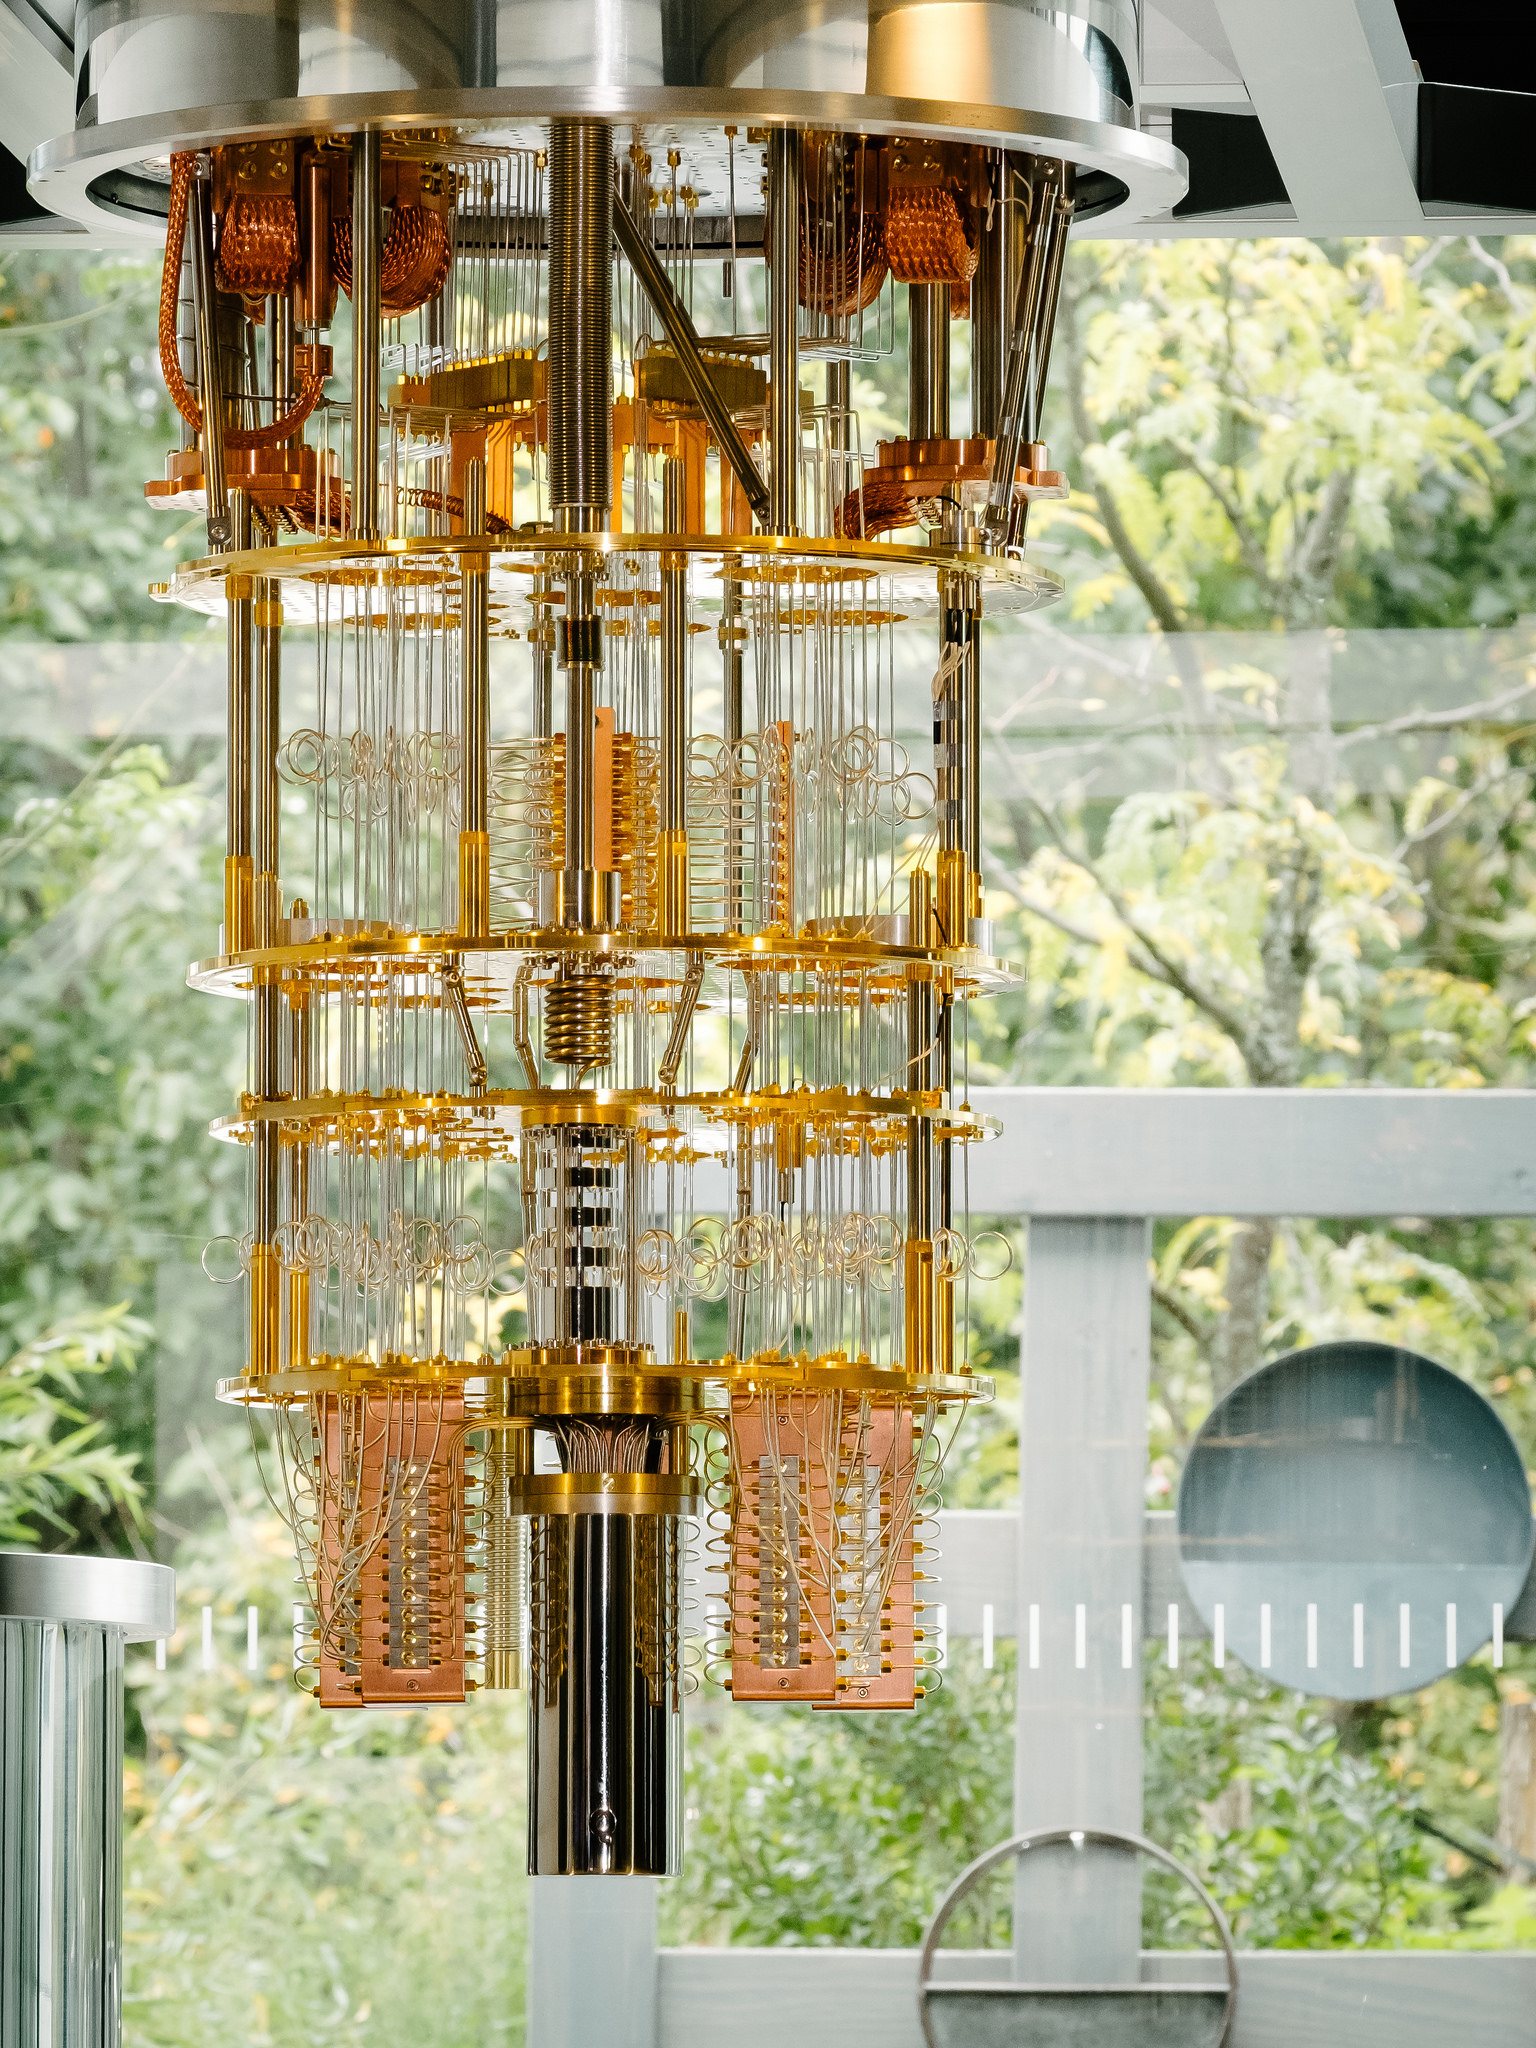 IBM’s Newest Quantum Computers Are The Most Powerful Of Their Kind